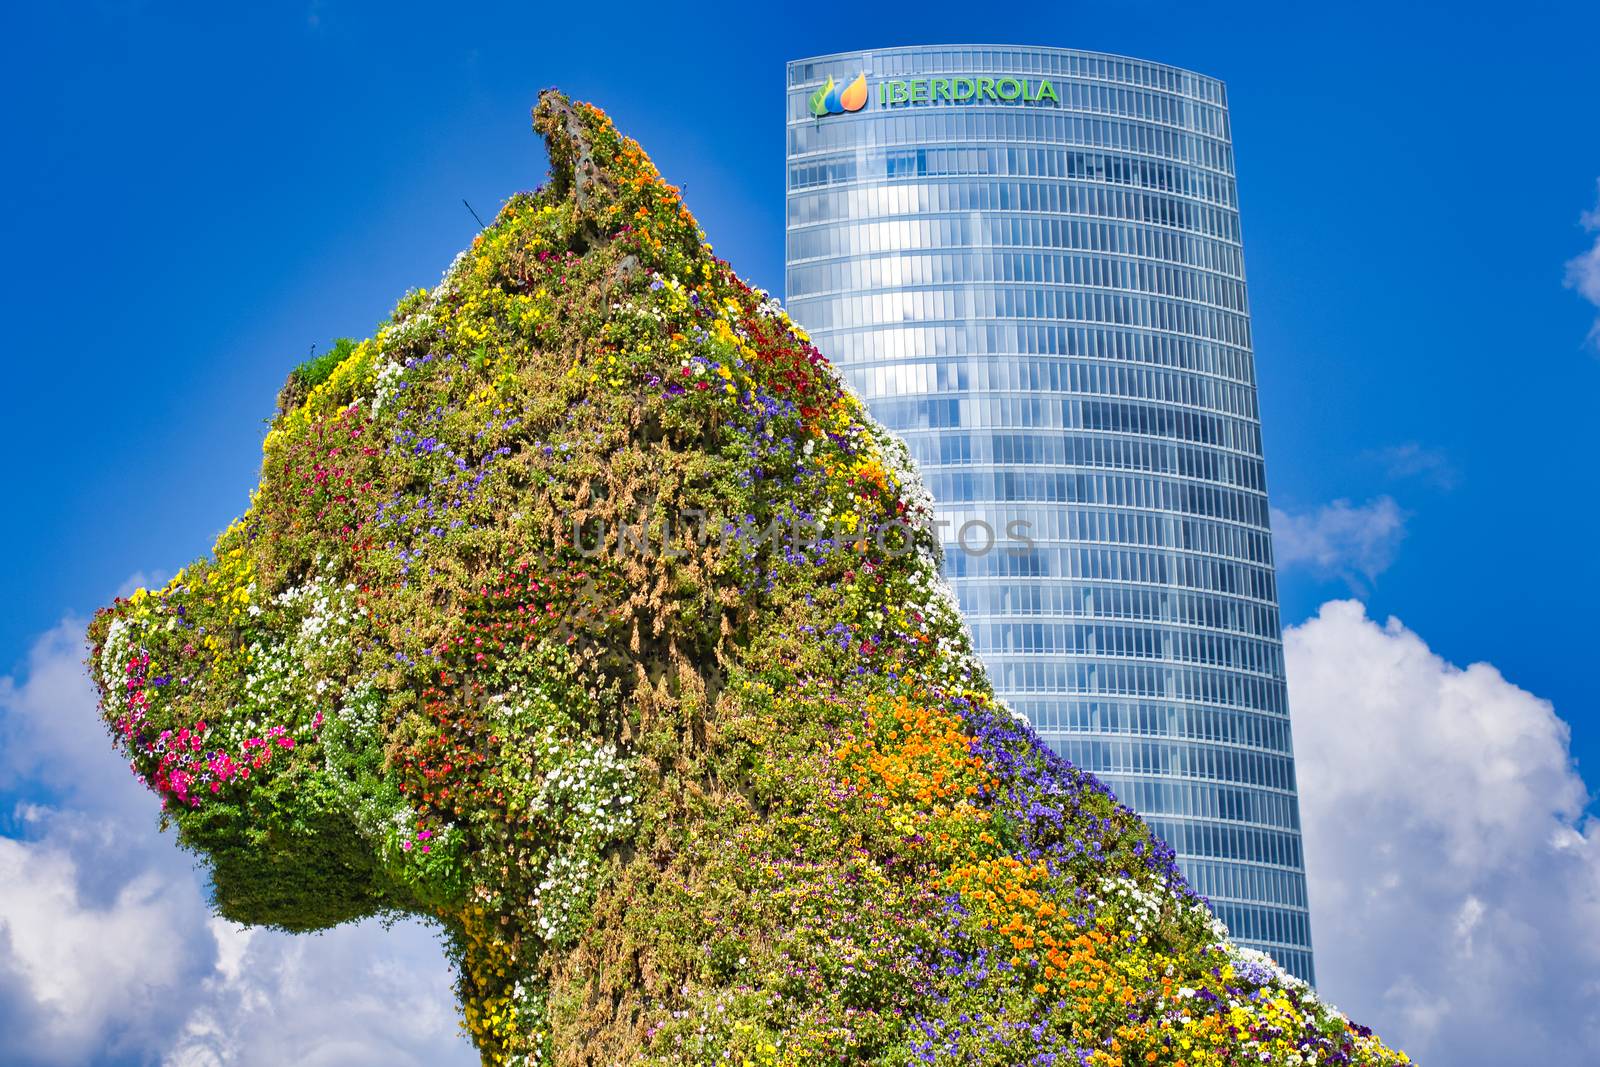 Flower covered dog Puppy guarding the Guggenheim Museum in Bilbao in Spain. Design by Jeff Koons by kb79